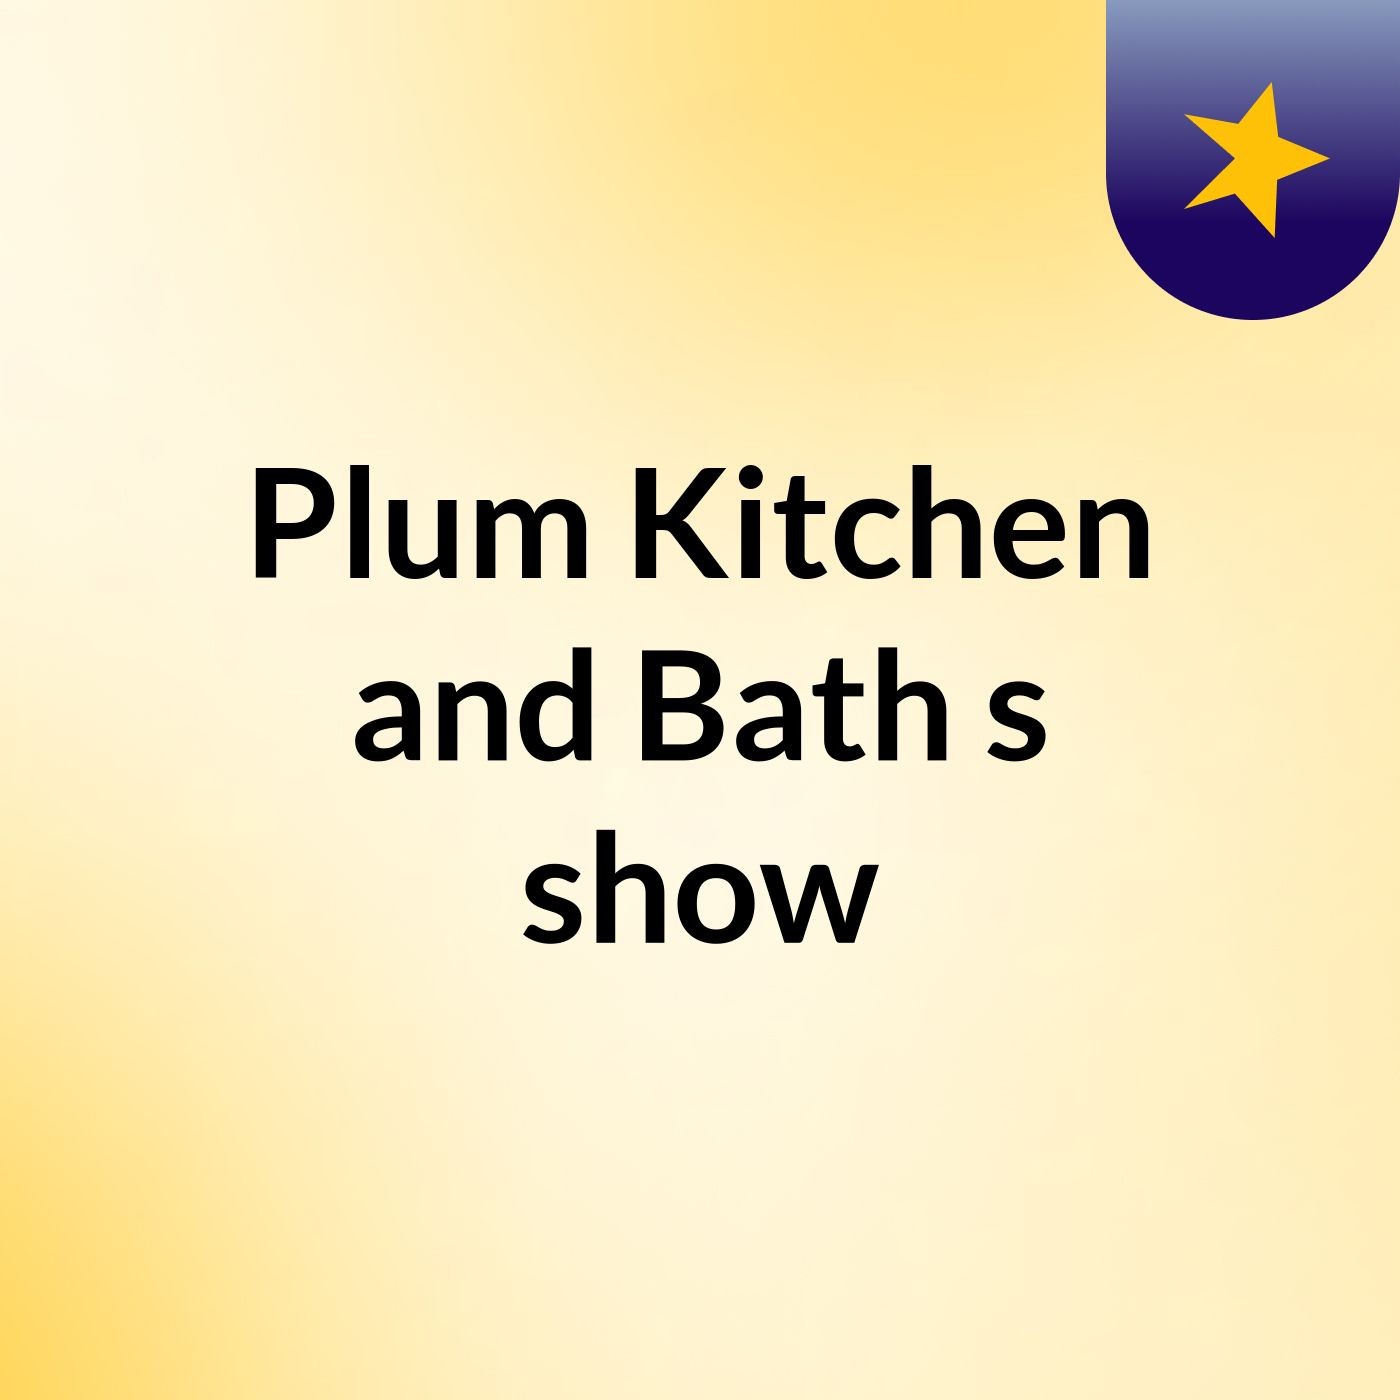 Plum Kitchen and Bath - Kitchen Cabinet Refacing Service Provider in Calgary